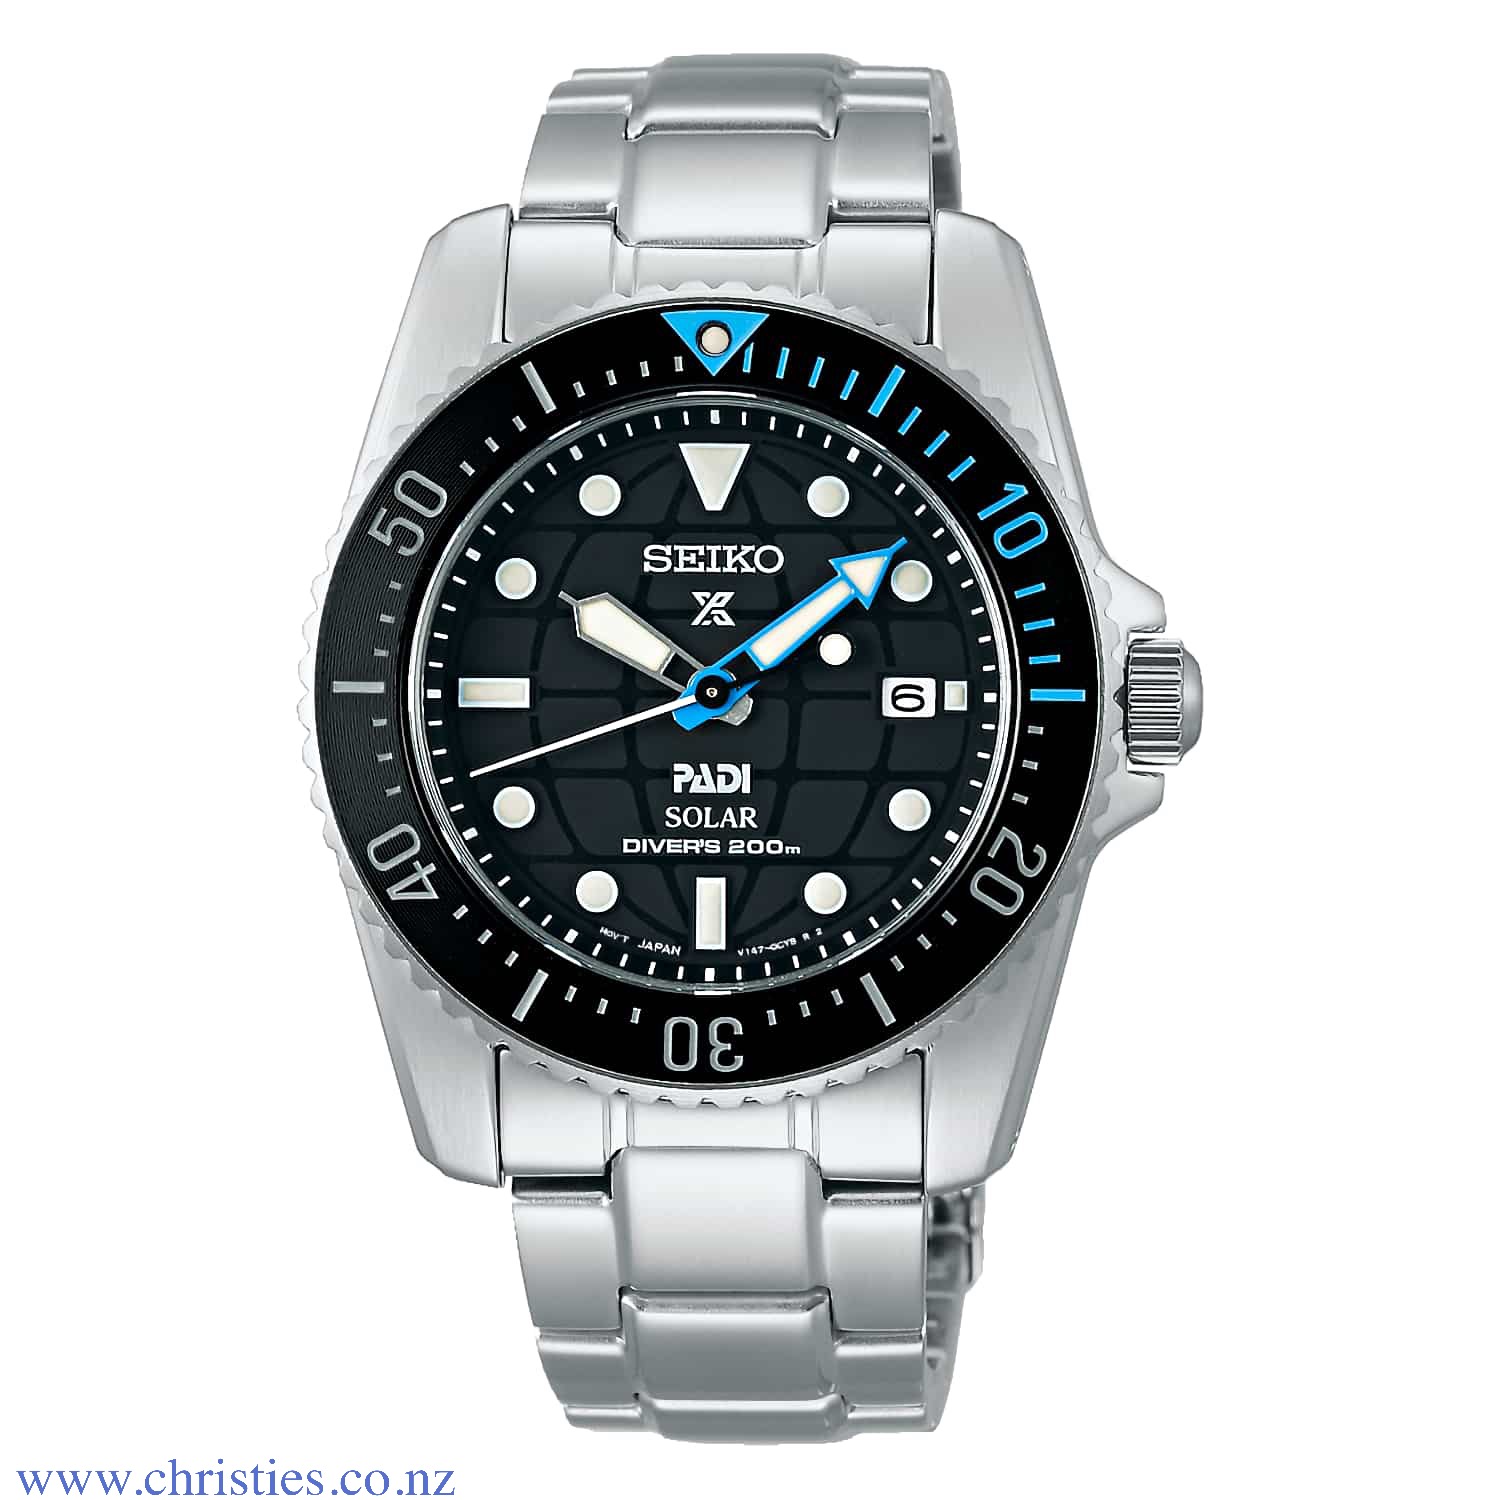 SNE575P1 Seiko Solar Prospex PADI Dive Watch. SNE575P1 Seiko Solar Prospex PADI Dive Watch   LAYBUY - Pay it easy, in 6 weekly payments and have it now. Only pay the price of your purchase, when you pay your instalments on time. A late fee may be applie b